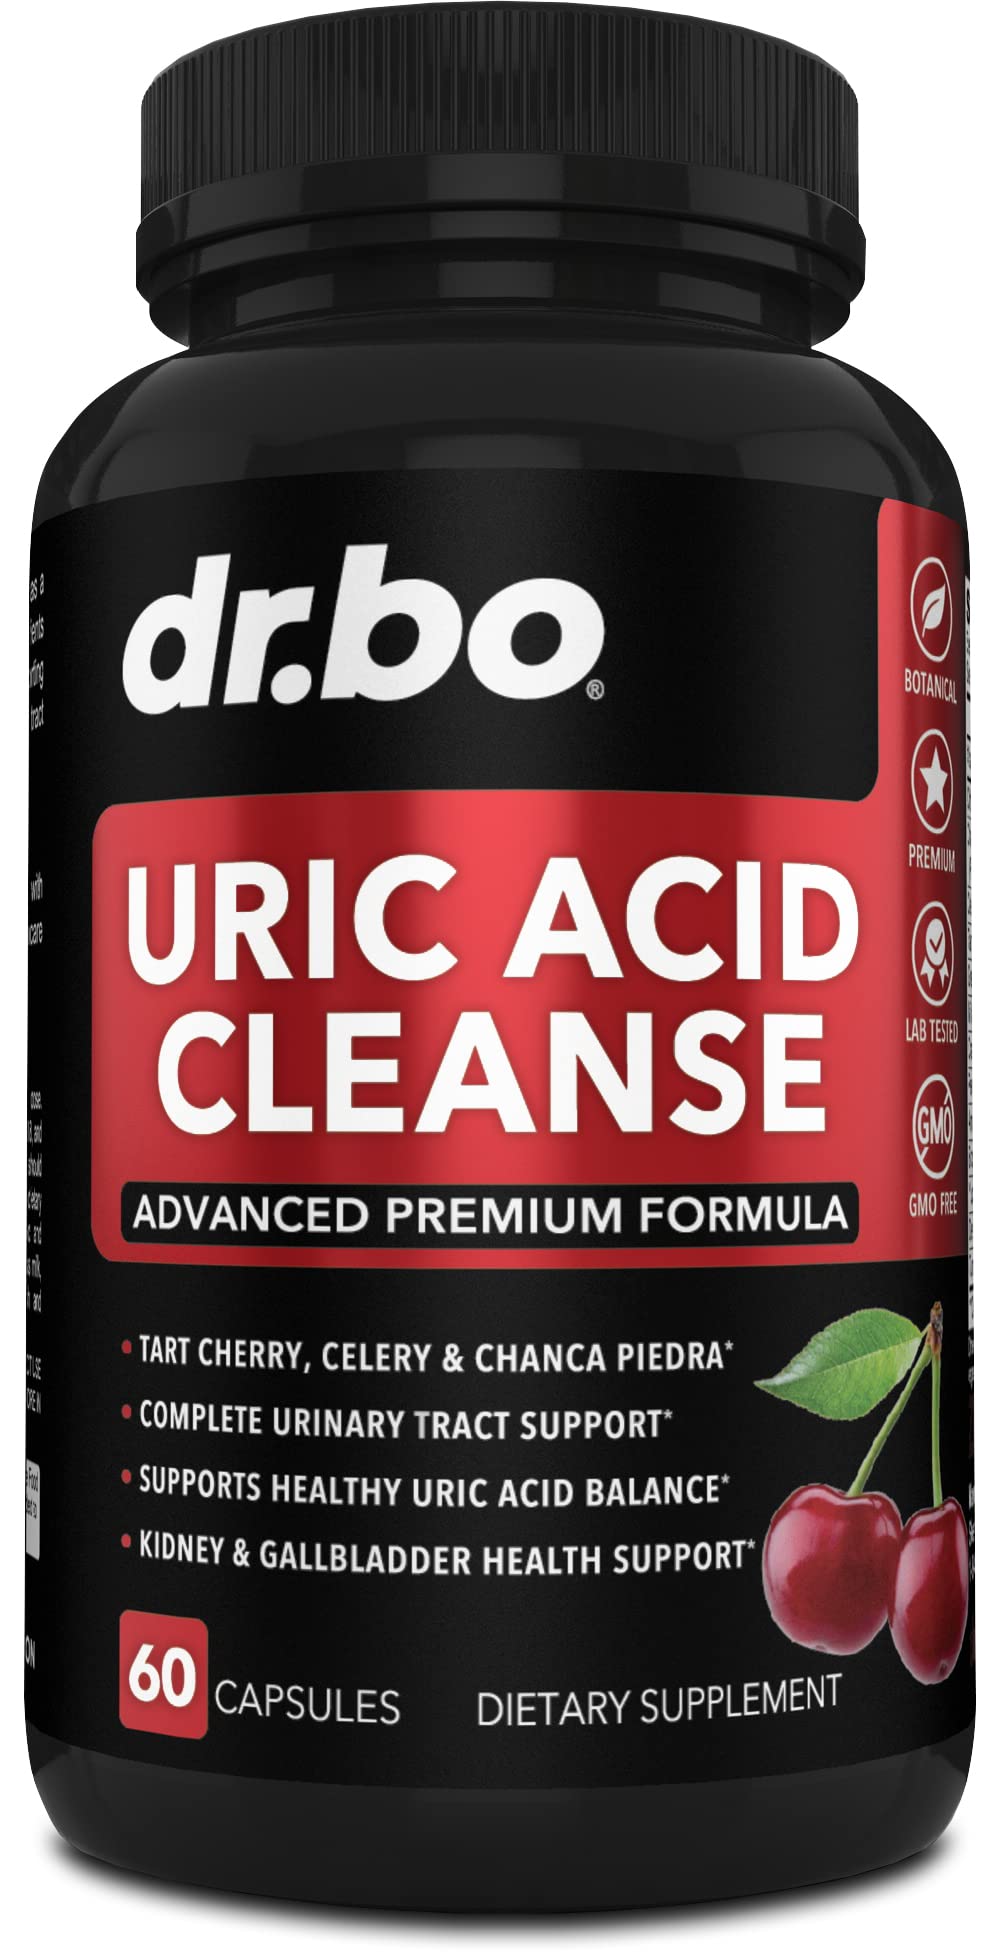 Uric Acid Cleanse Support - Kidney Herbal Supplements Kidney Cleanse Detox Purge 60 Capsules